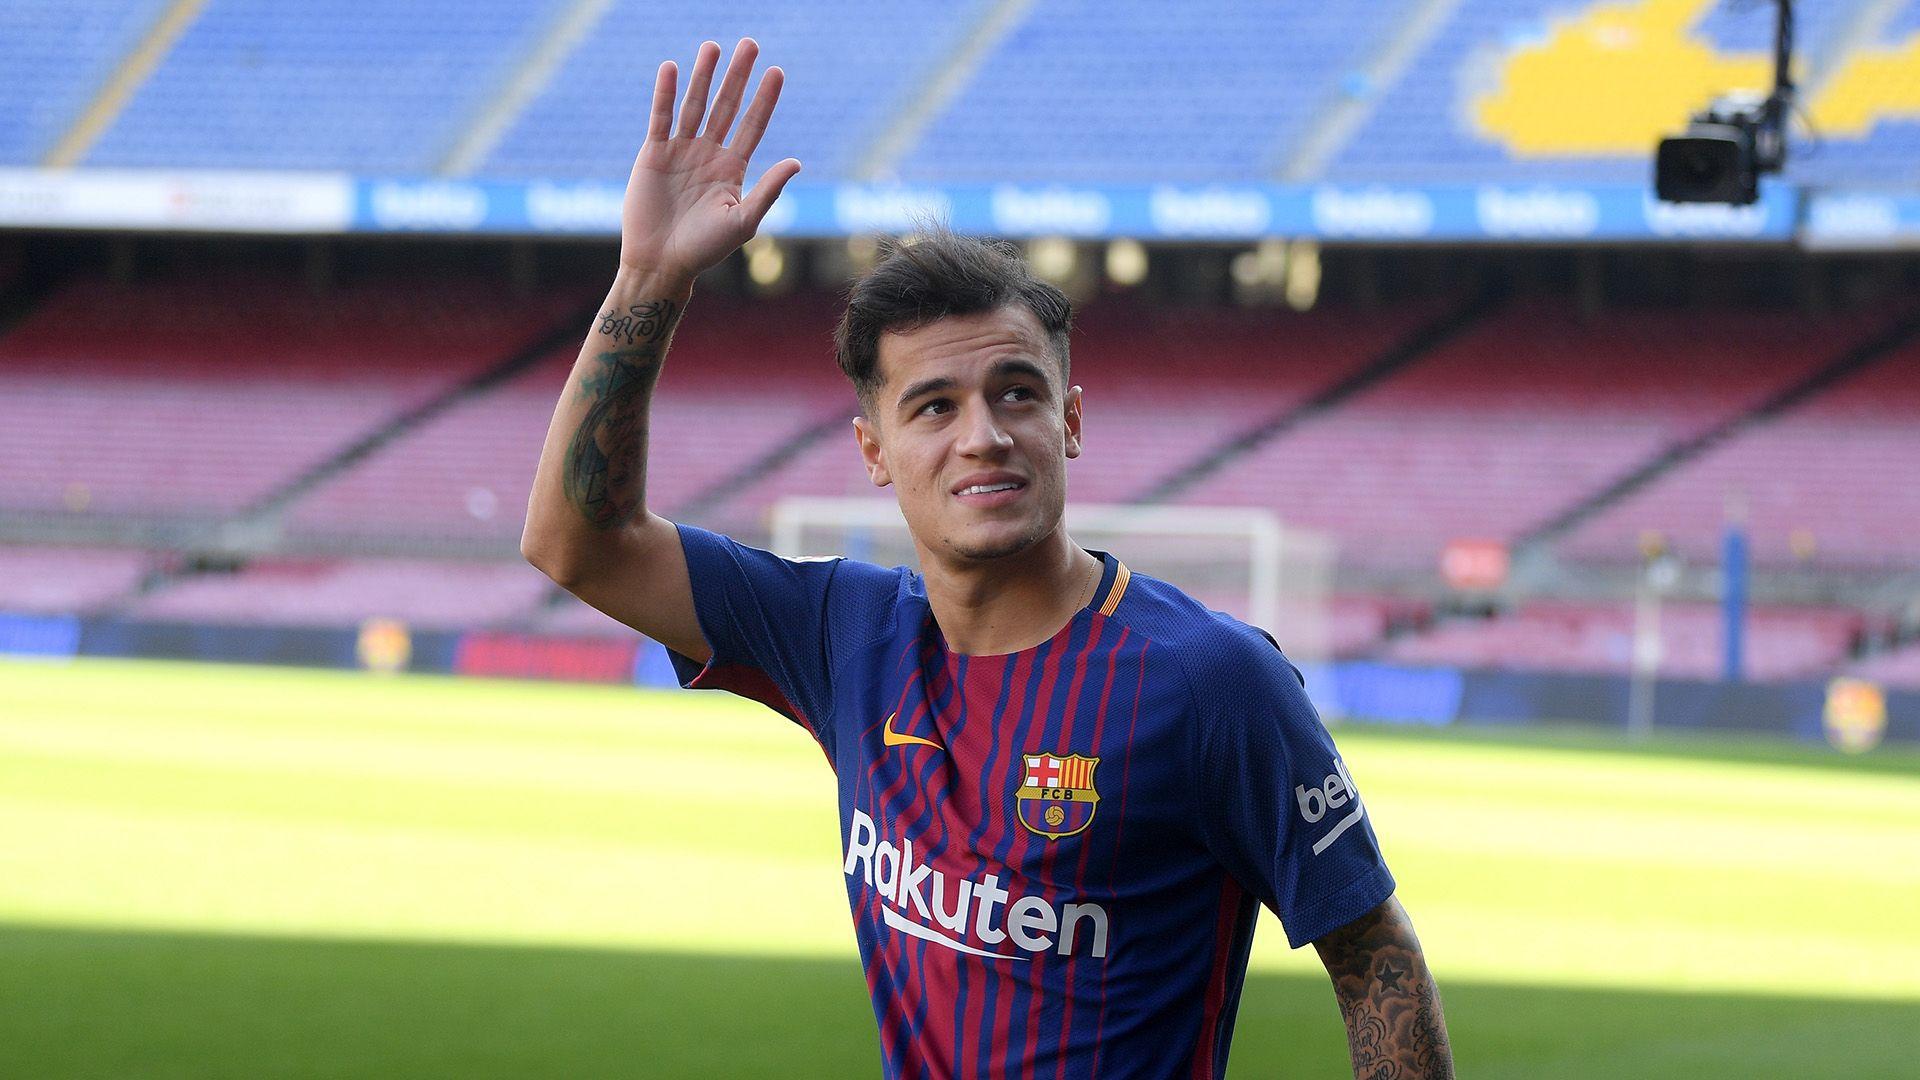 Coutinho sends one last message On Instagram and got the most